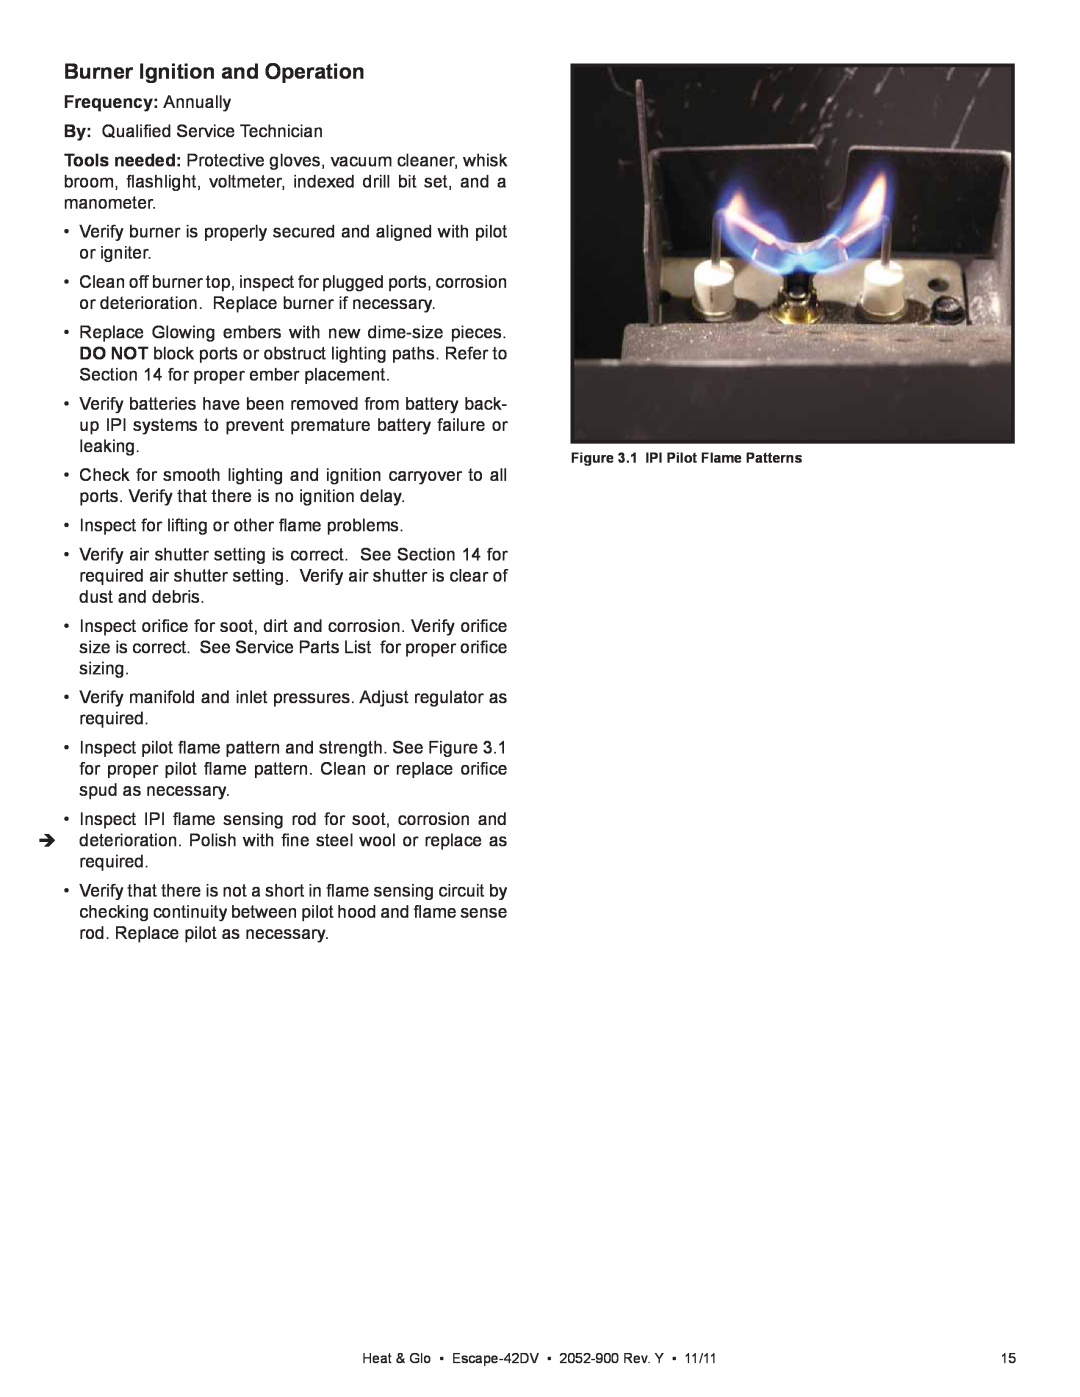 Heat & Glo LifeStyle Escape-42DVLP owner manual Burner Ignition and Operation, Frequency: Annually 